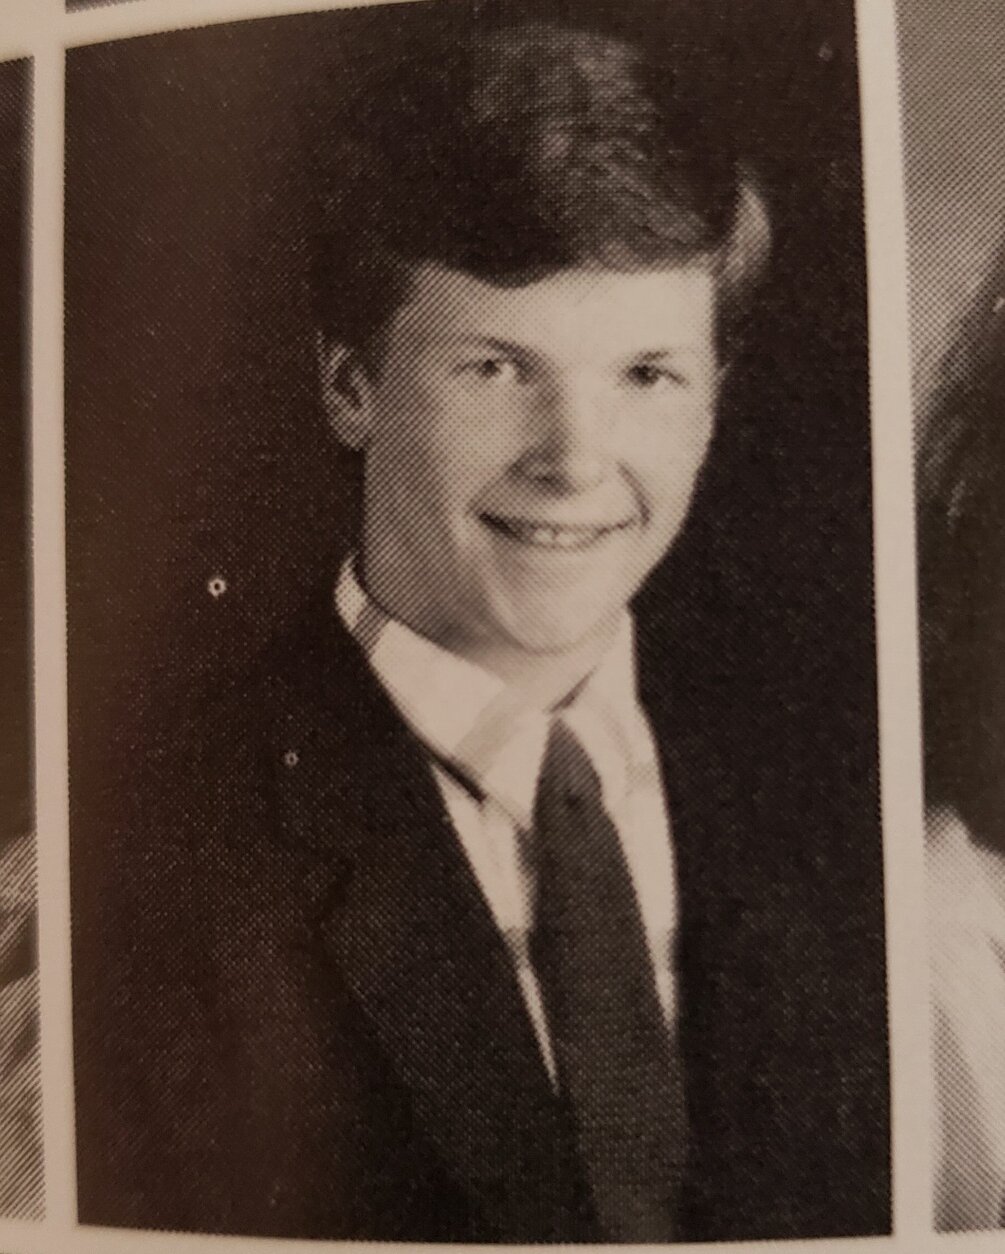 Preston's game-watching with "Irrational Marc" has drawn comparisons to those Sonic ads that feature another Syracuse alum, T.J. Jagodowski, whose yearbook photo is shown here.